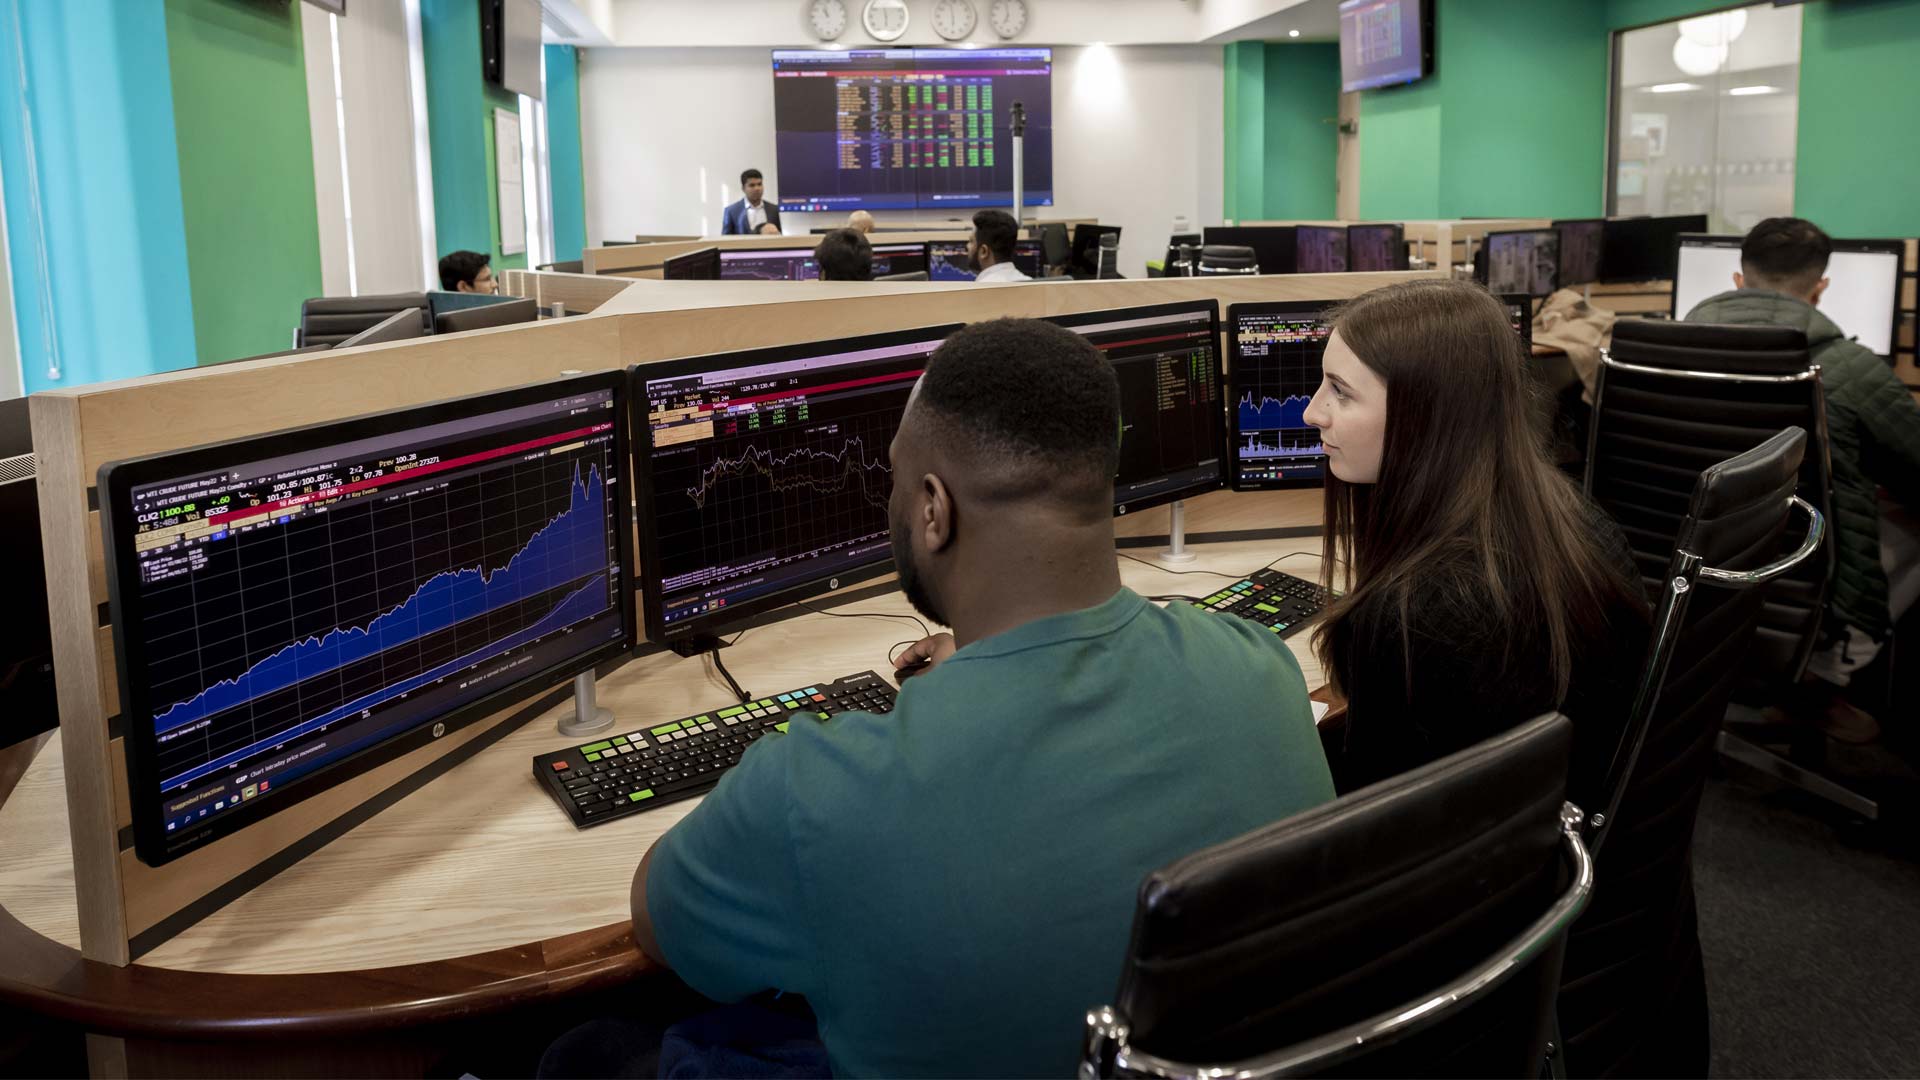 Two students in front of a bank of screens displaying data